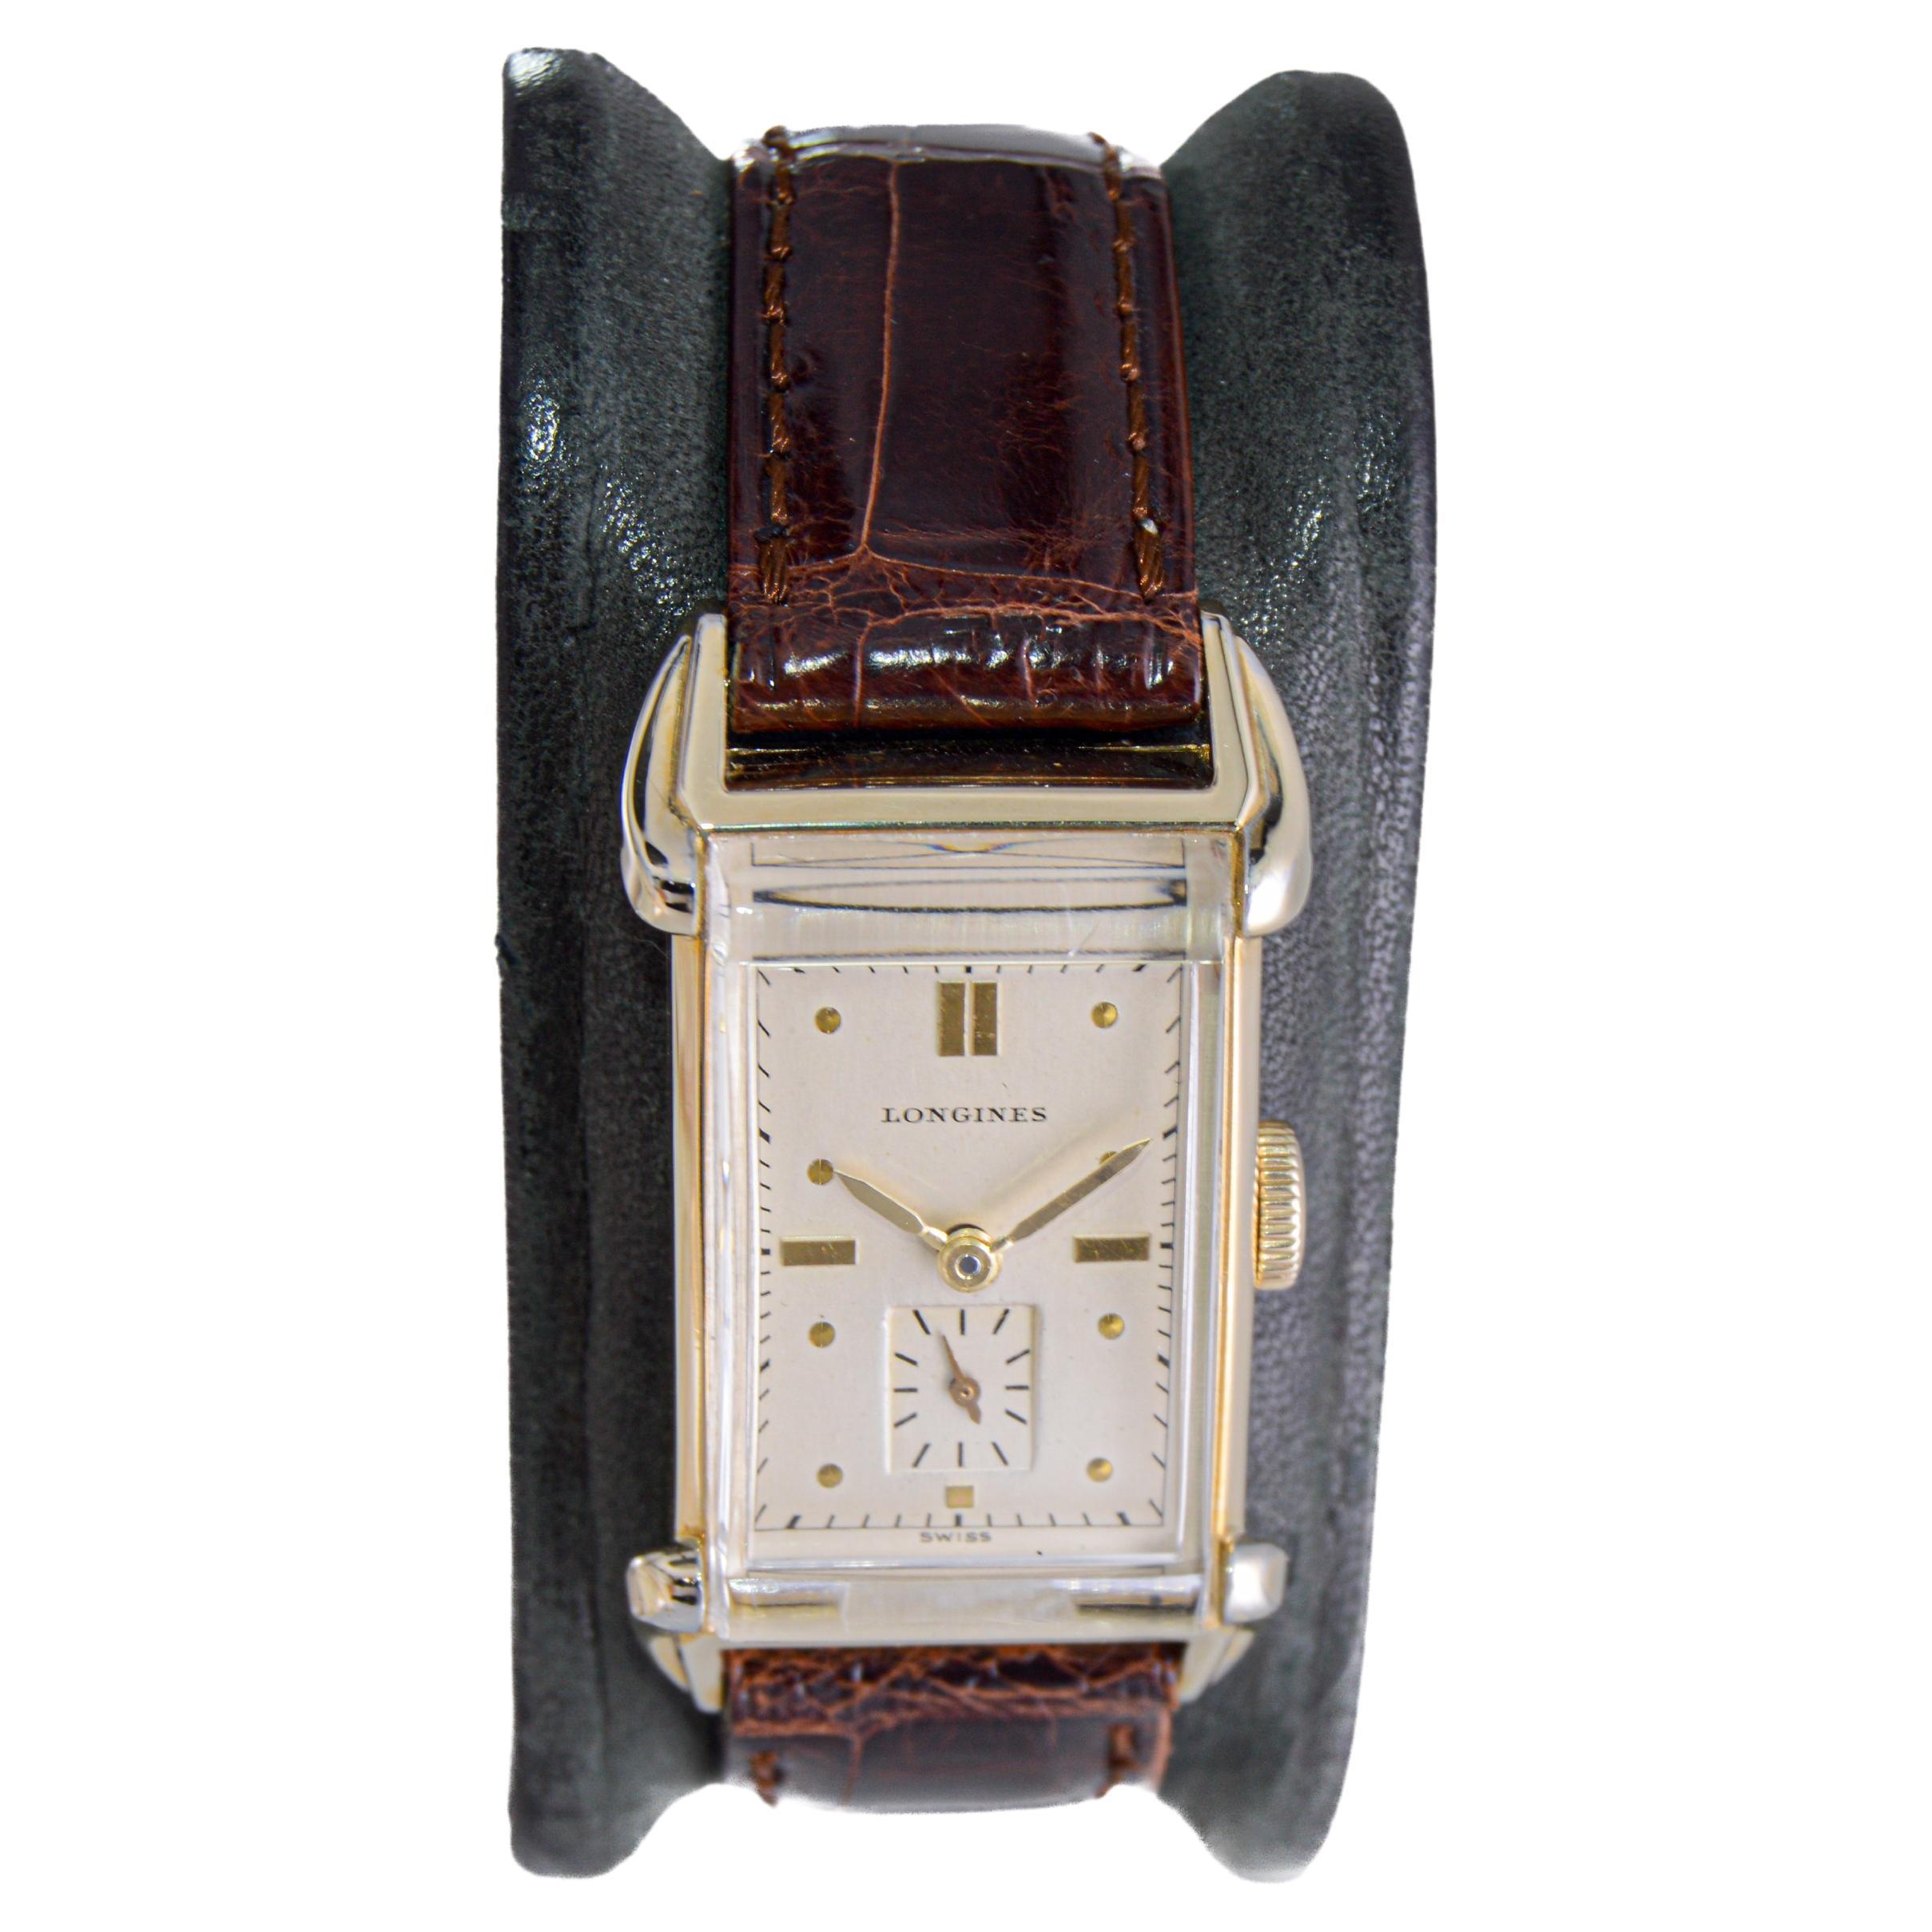 Longines Gold Filled Rare Art Deco Watch with Unique Crystal, circa 1940s